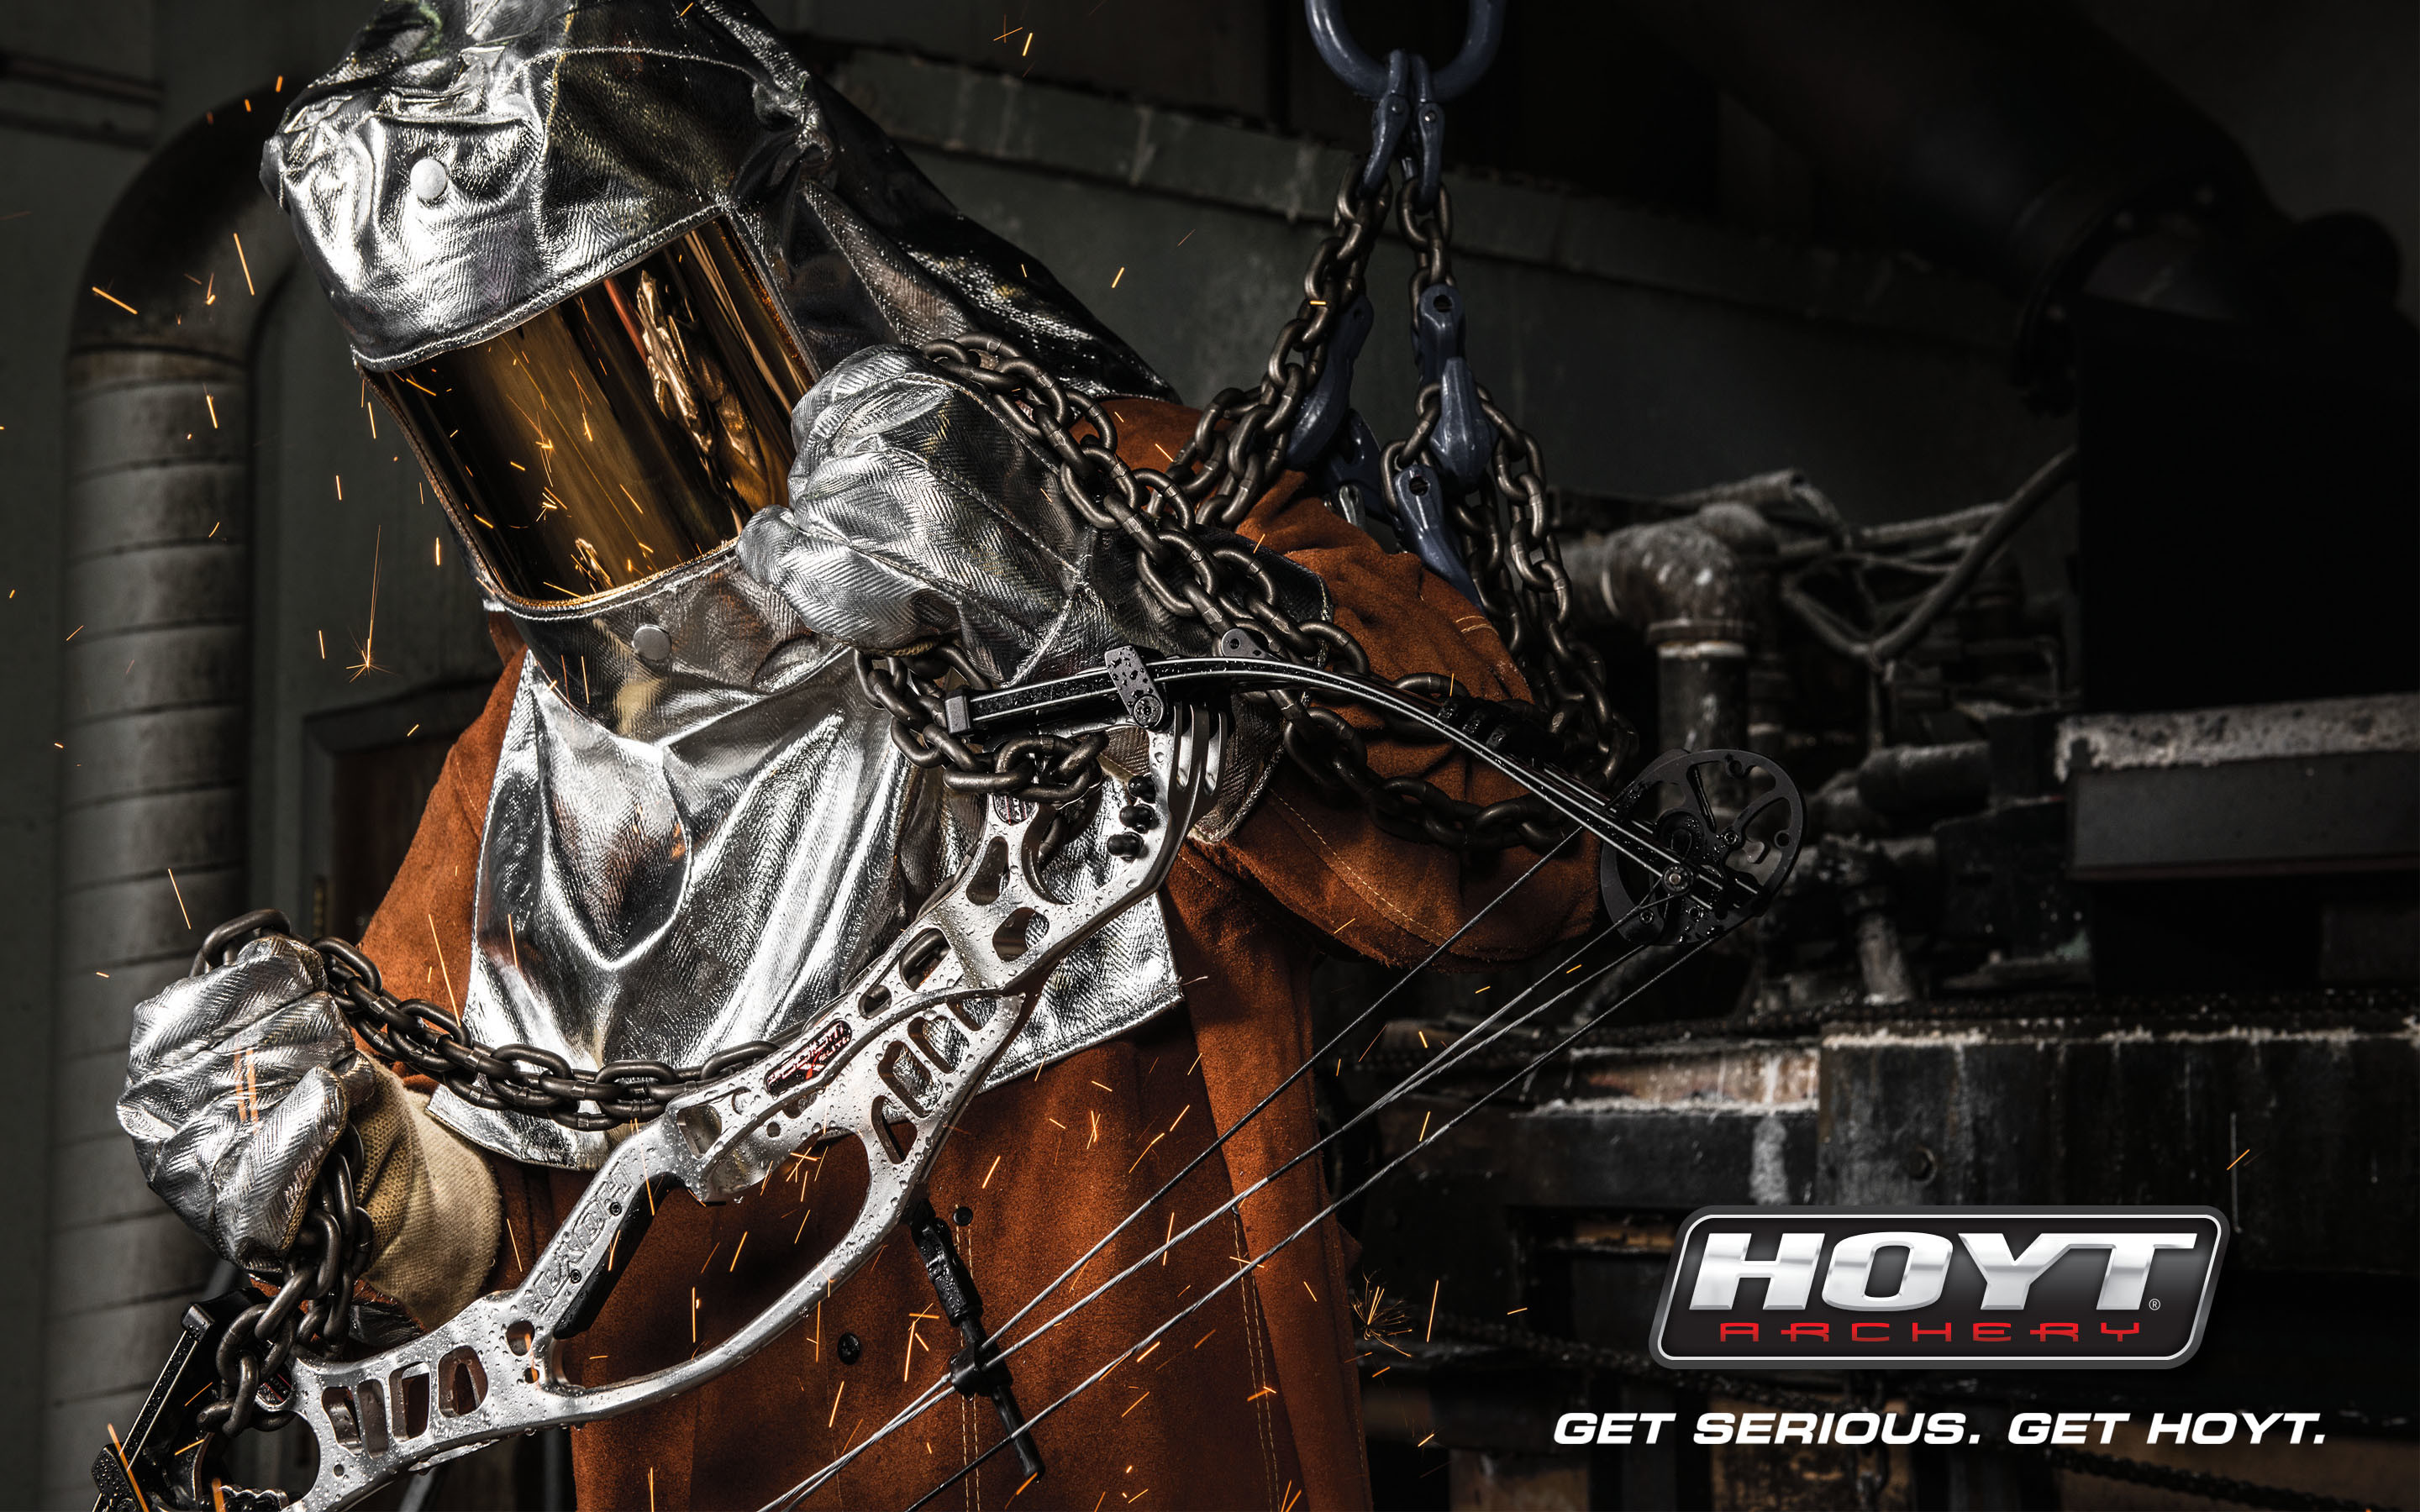 2880x1800 Download Hoyt wallpapers to your cell phone archery hoyt Source Â· View All  Target archery Compound Bows